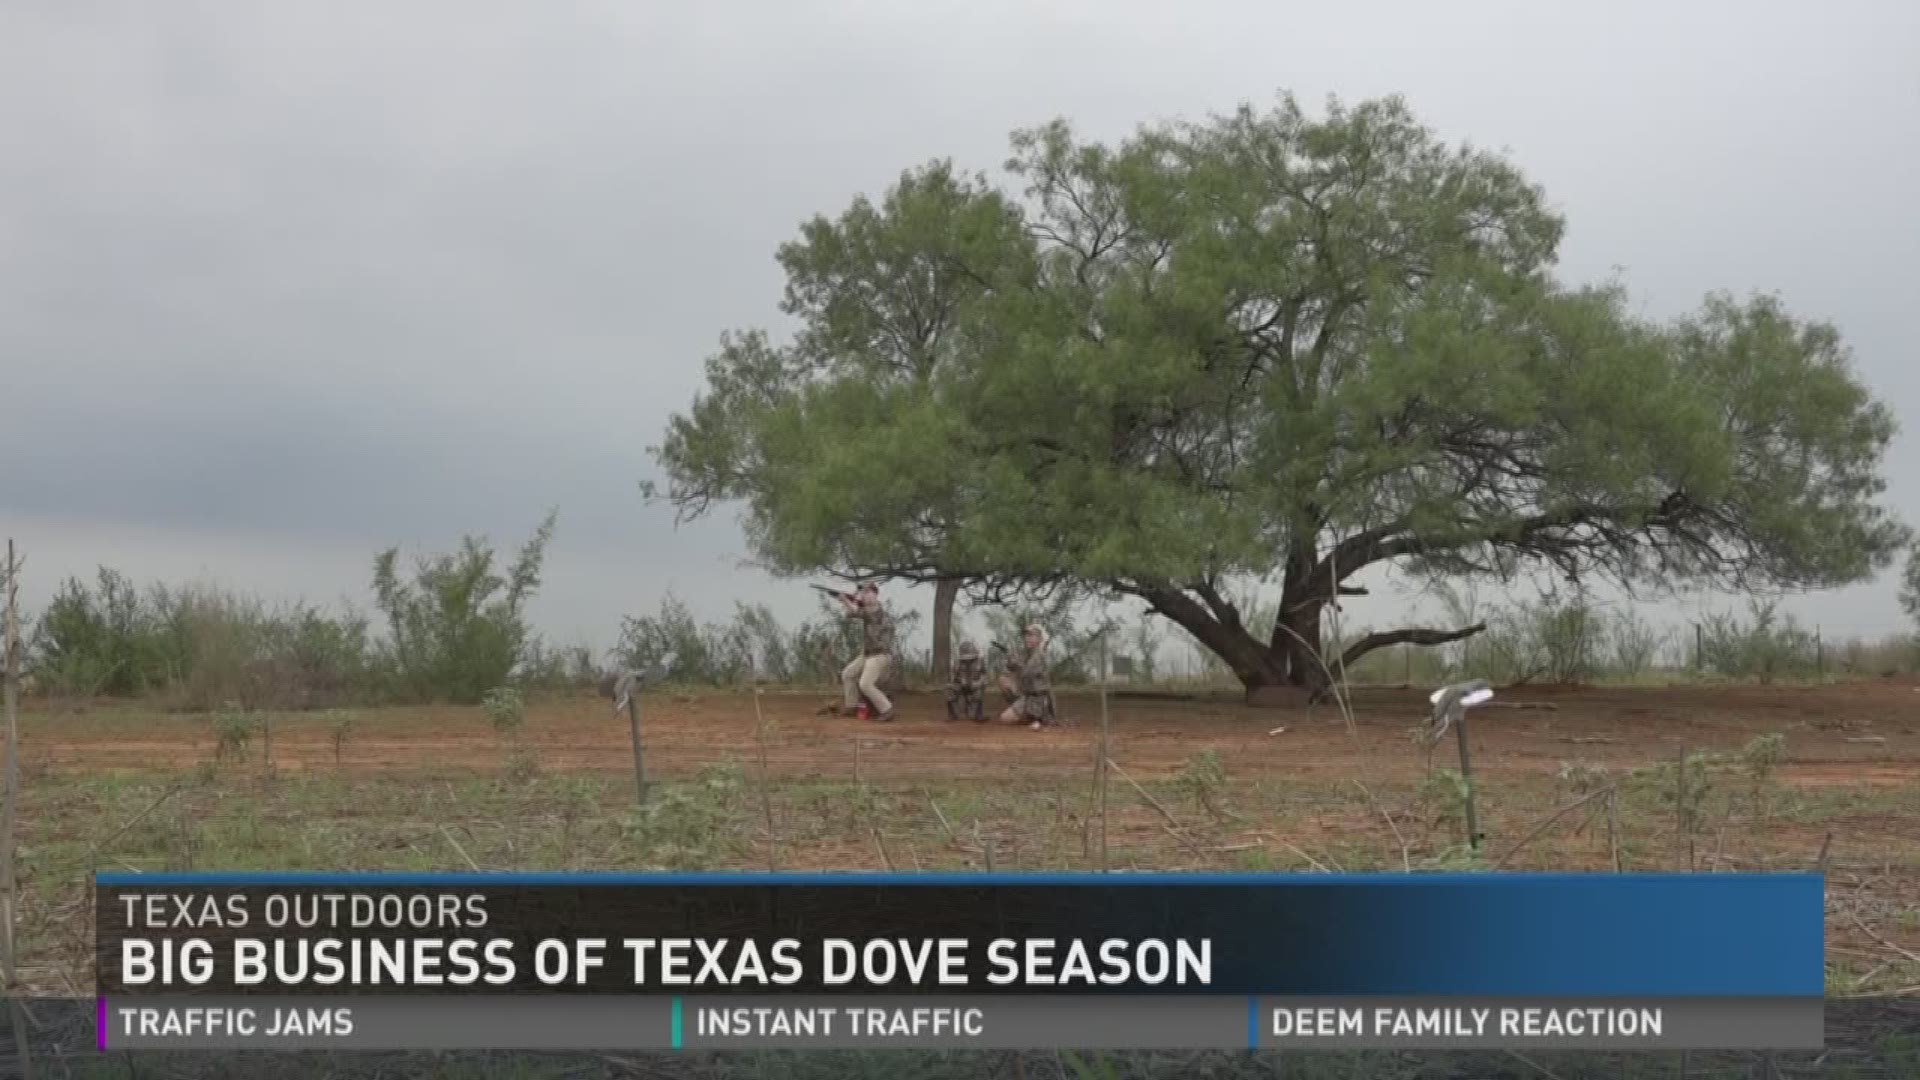 When fall its, for hunters that means dove season. It's the first opportunity to shake the rust out the barrels and it's turned into big business.